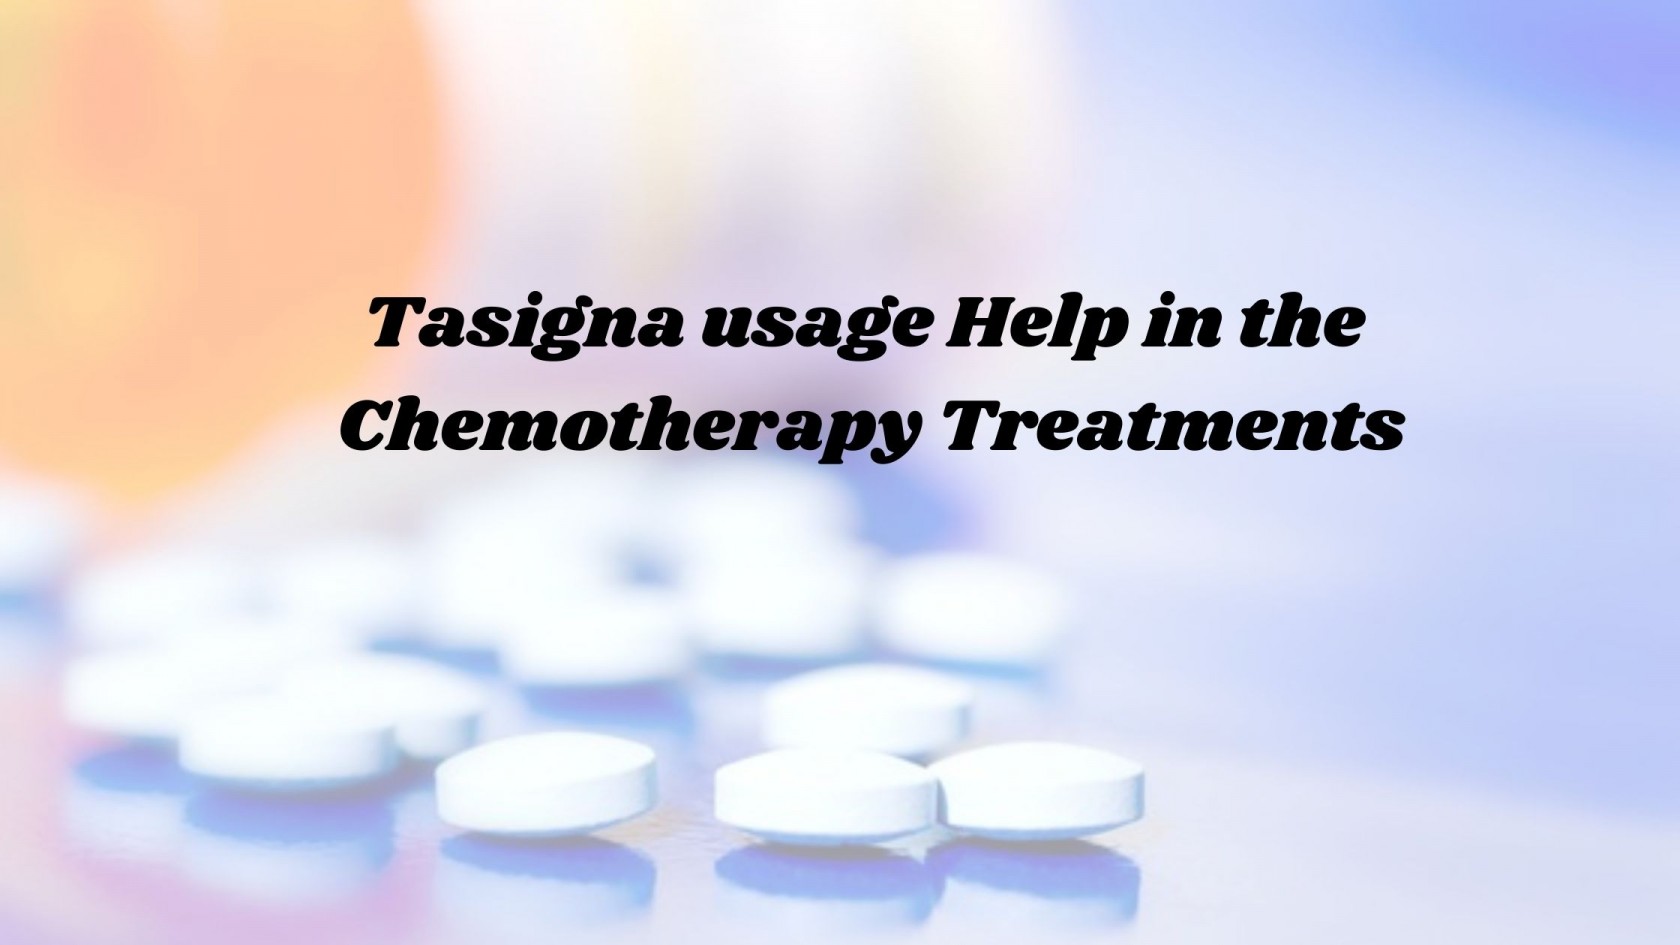 Tasigna Usage Help in the Chemotherapy Treatments